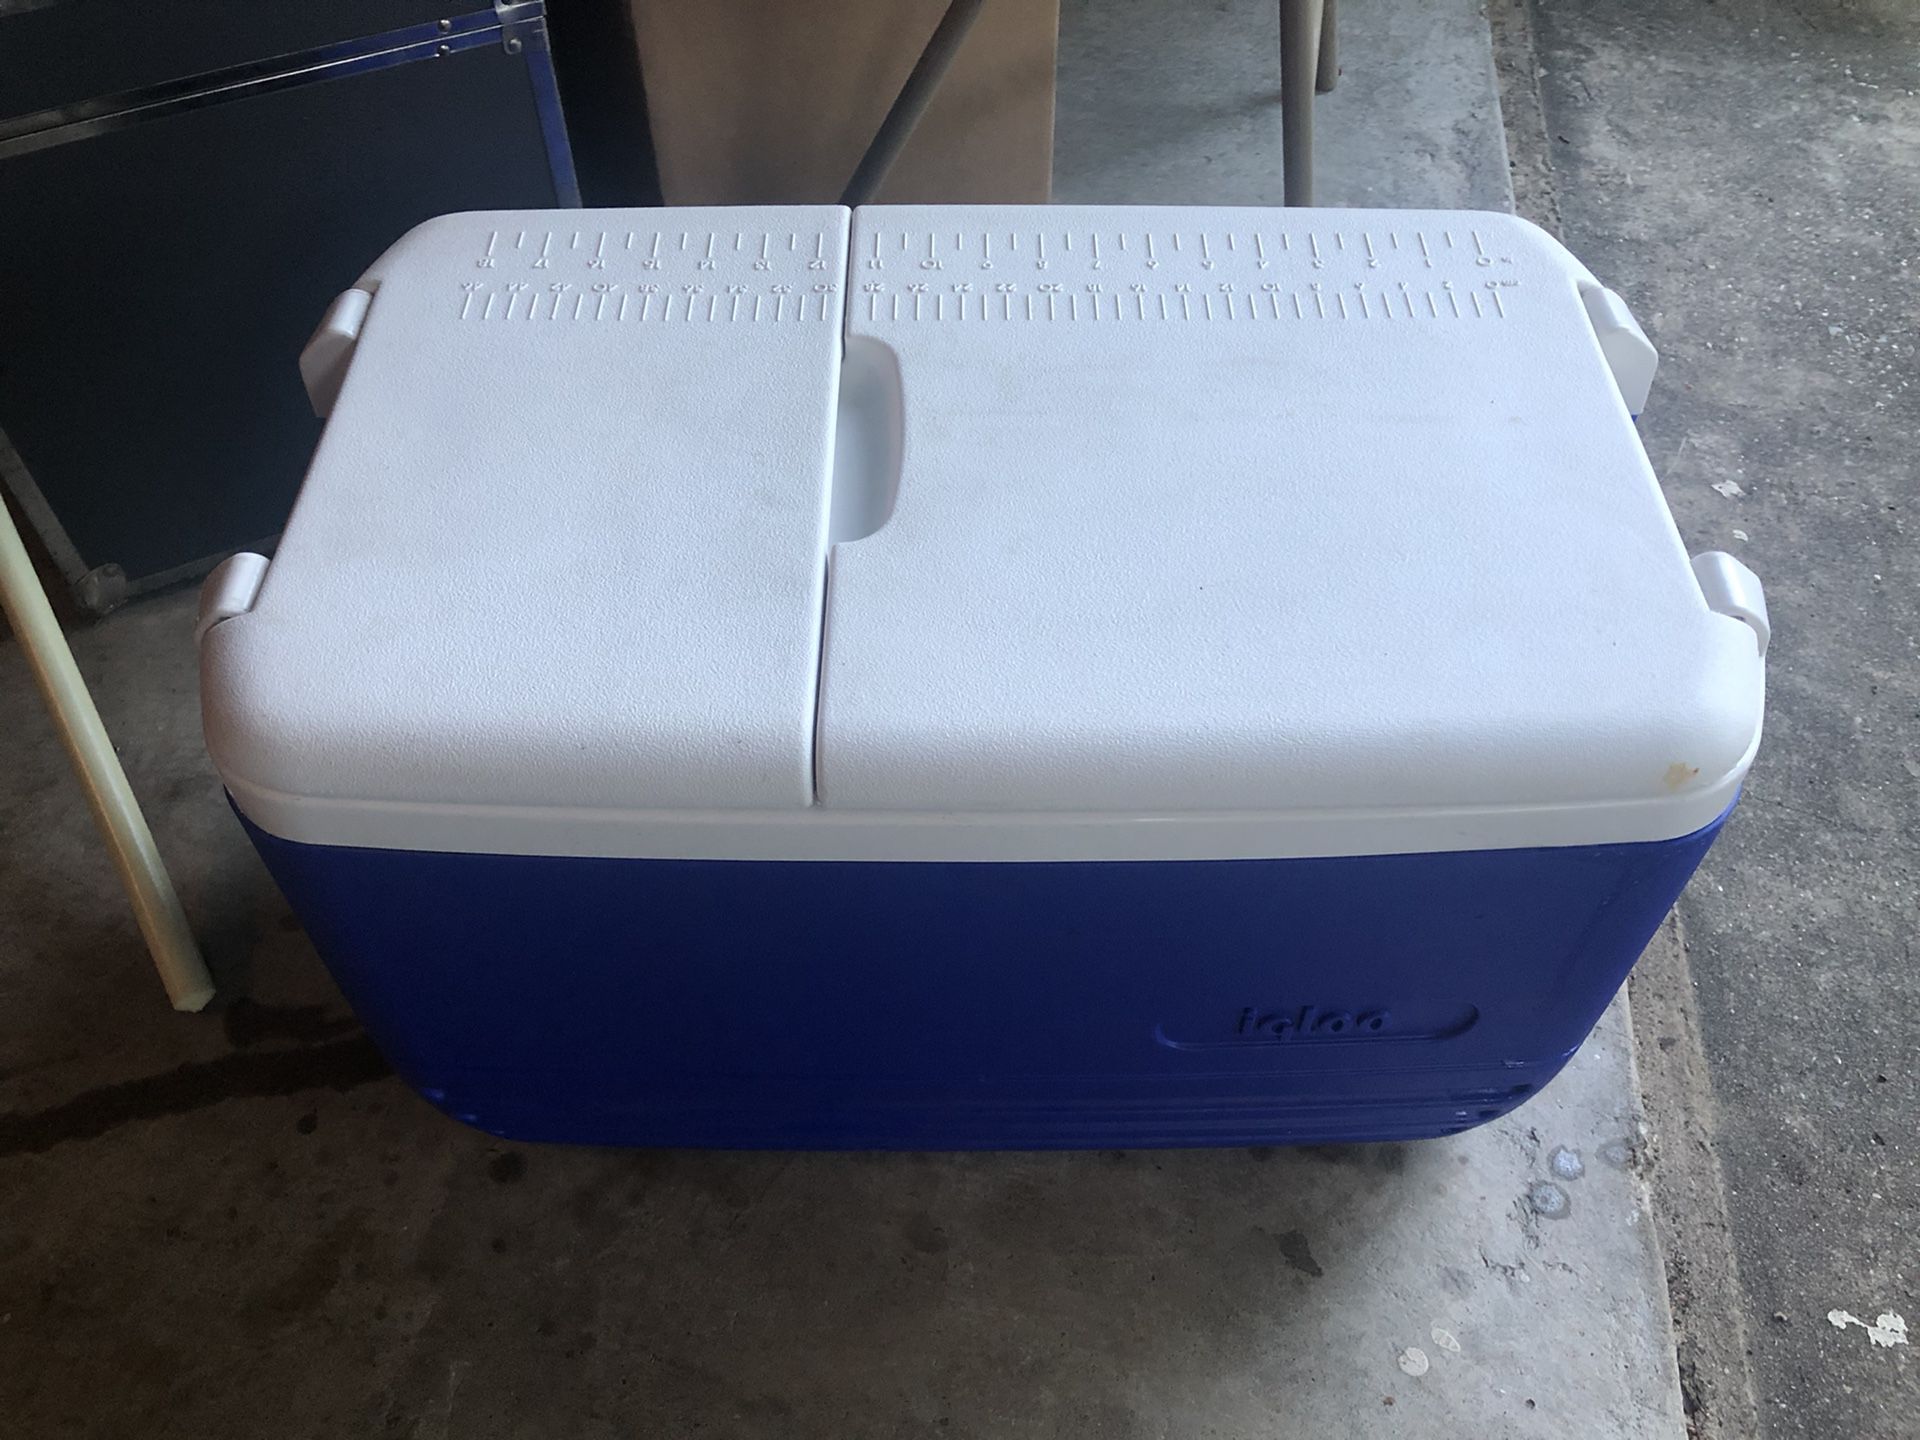 Cooler and coleman water cooler